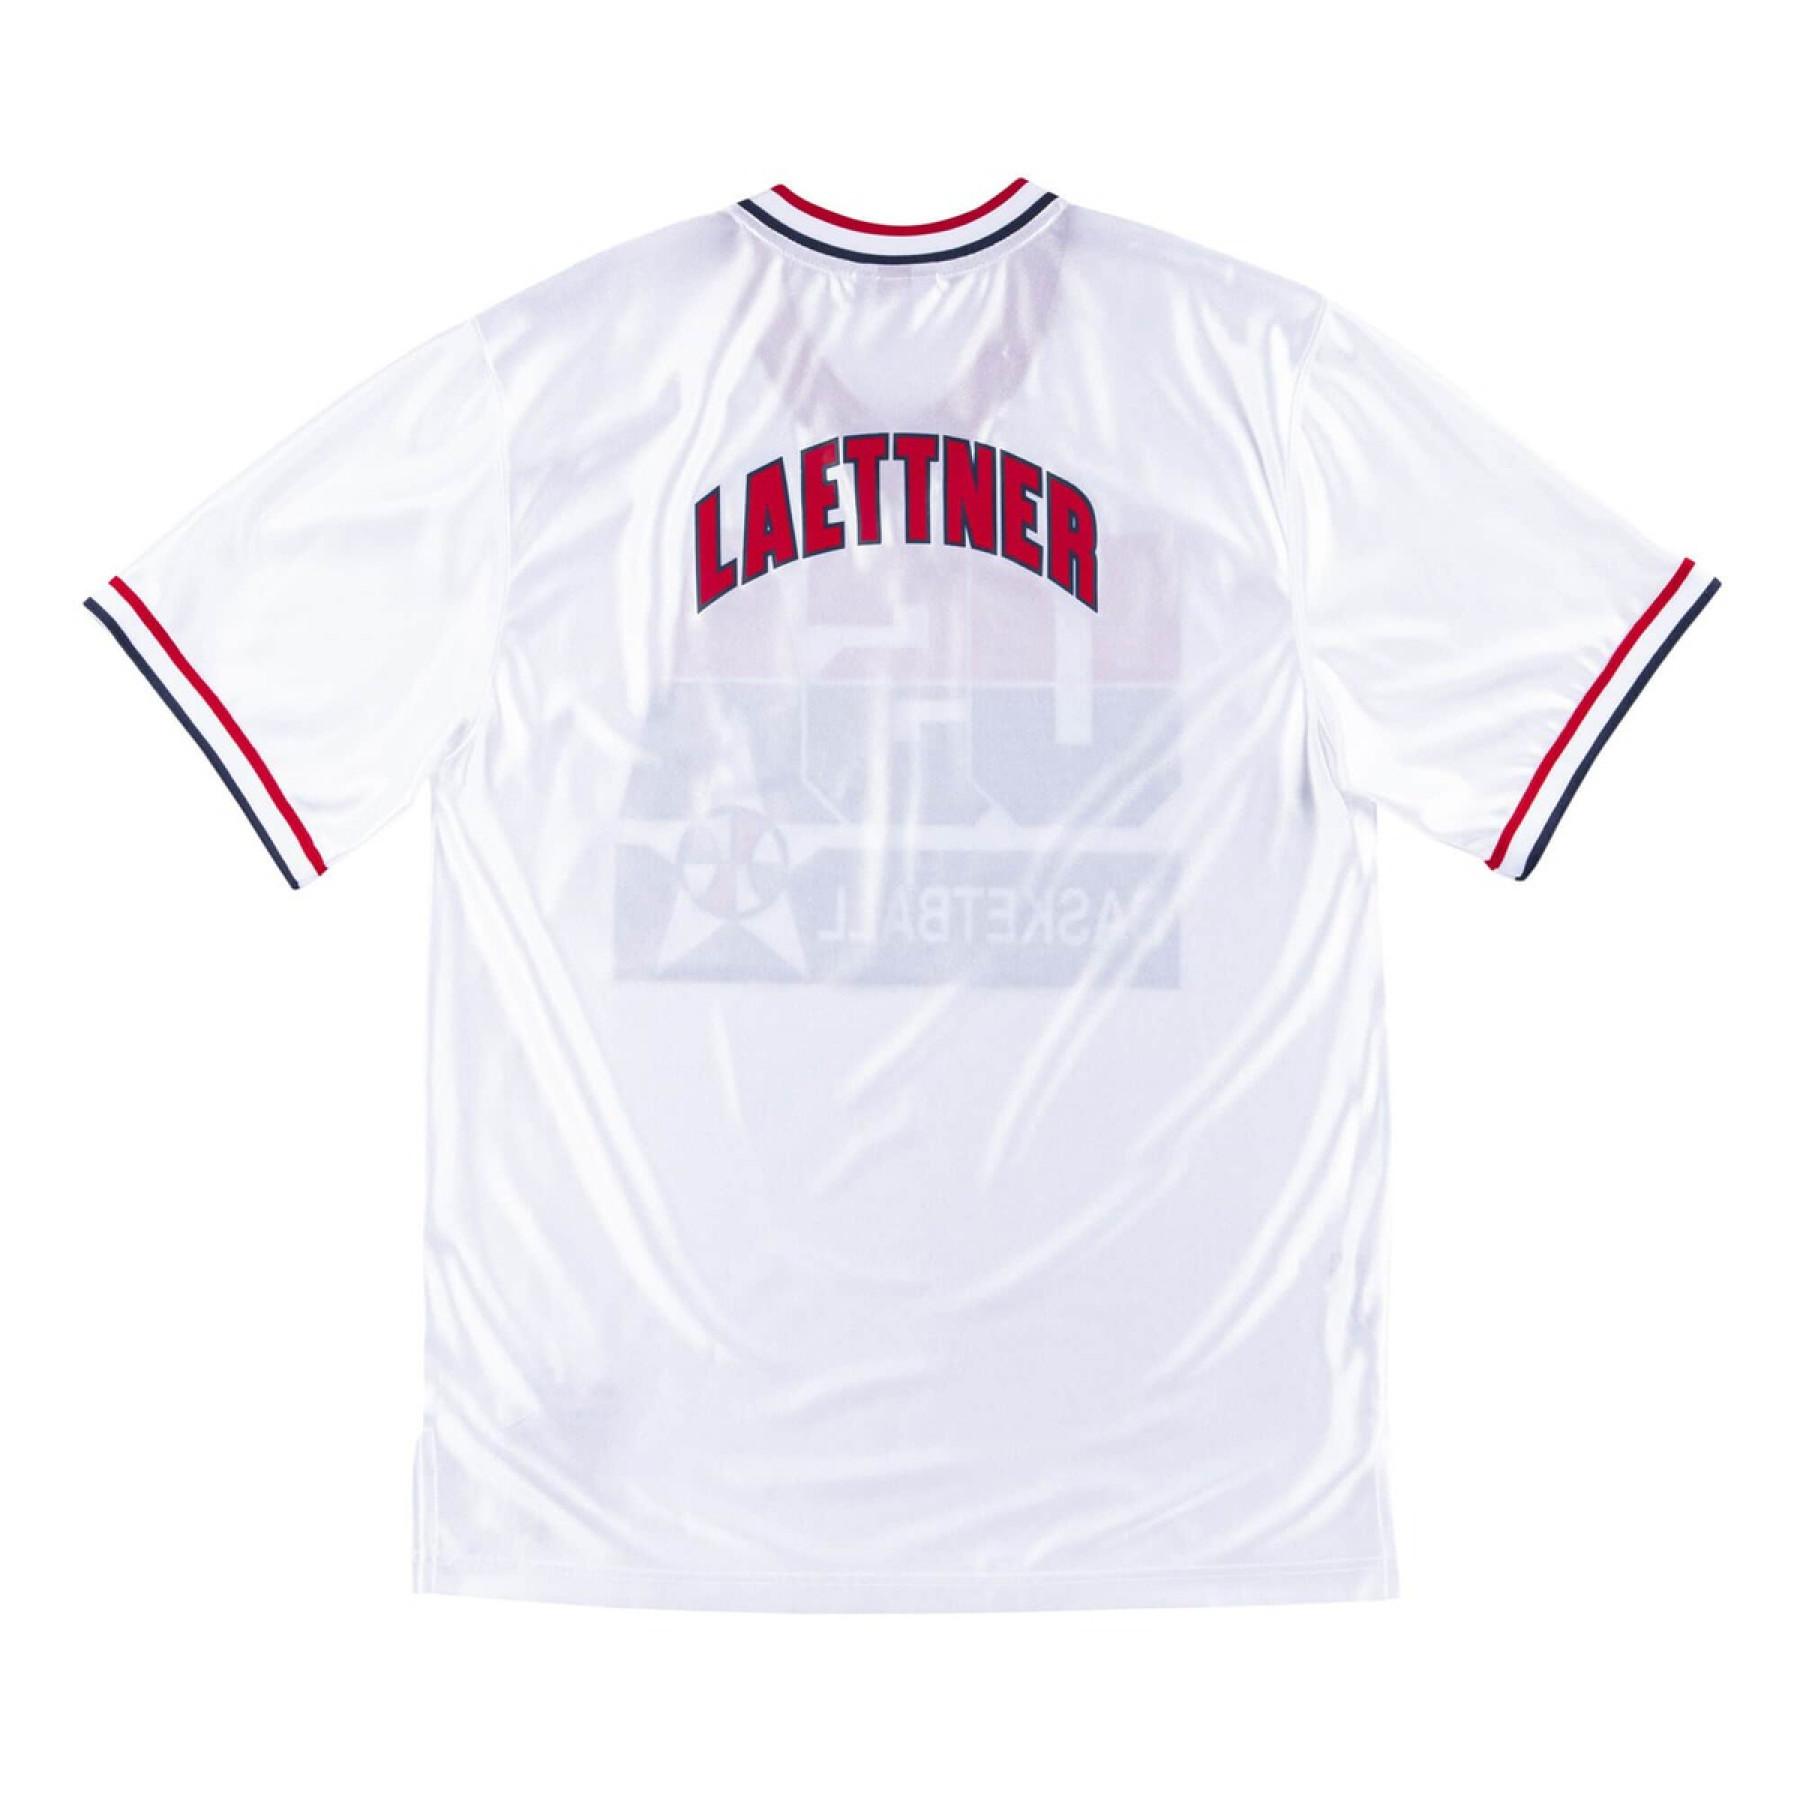 Authentic team jersey USA Christian Laettner